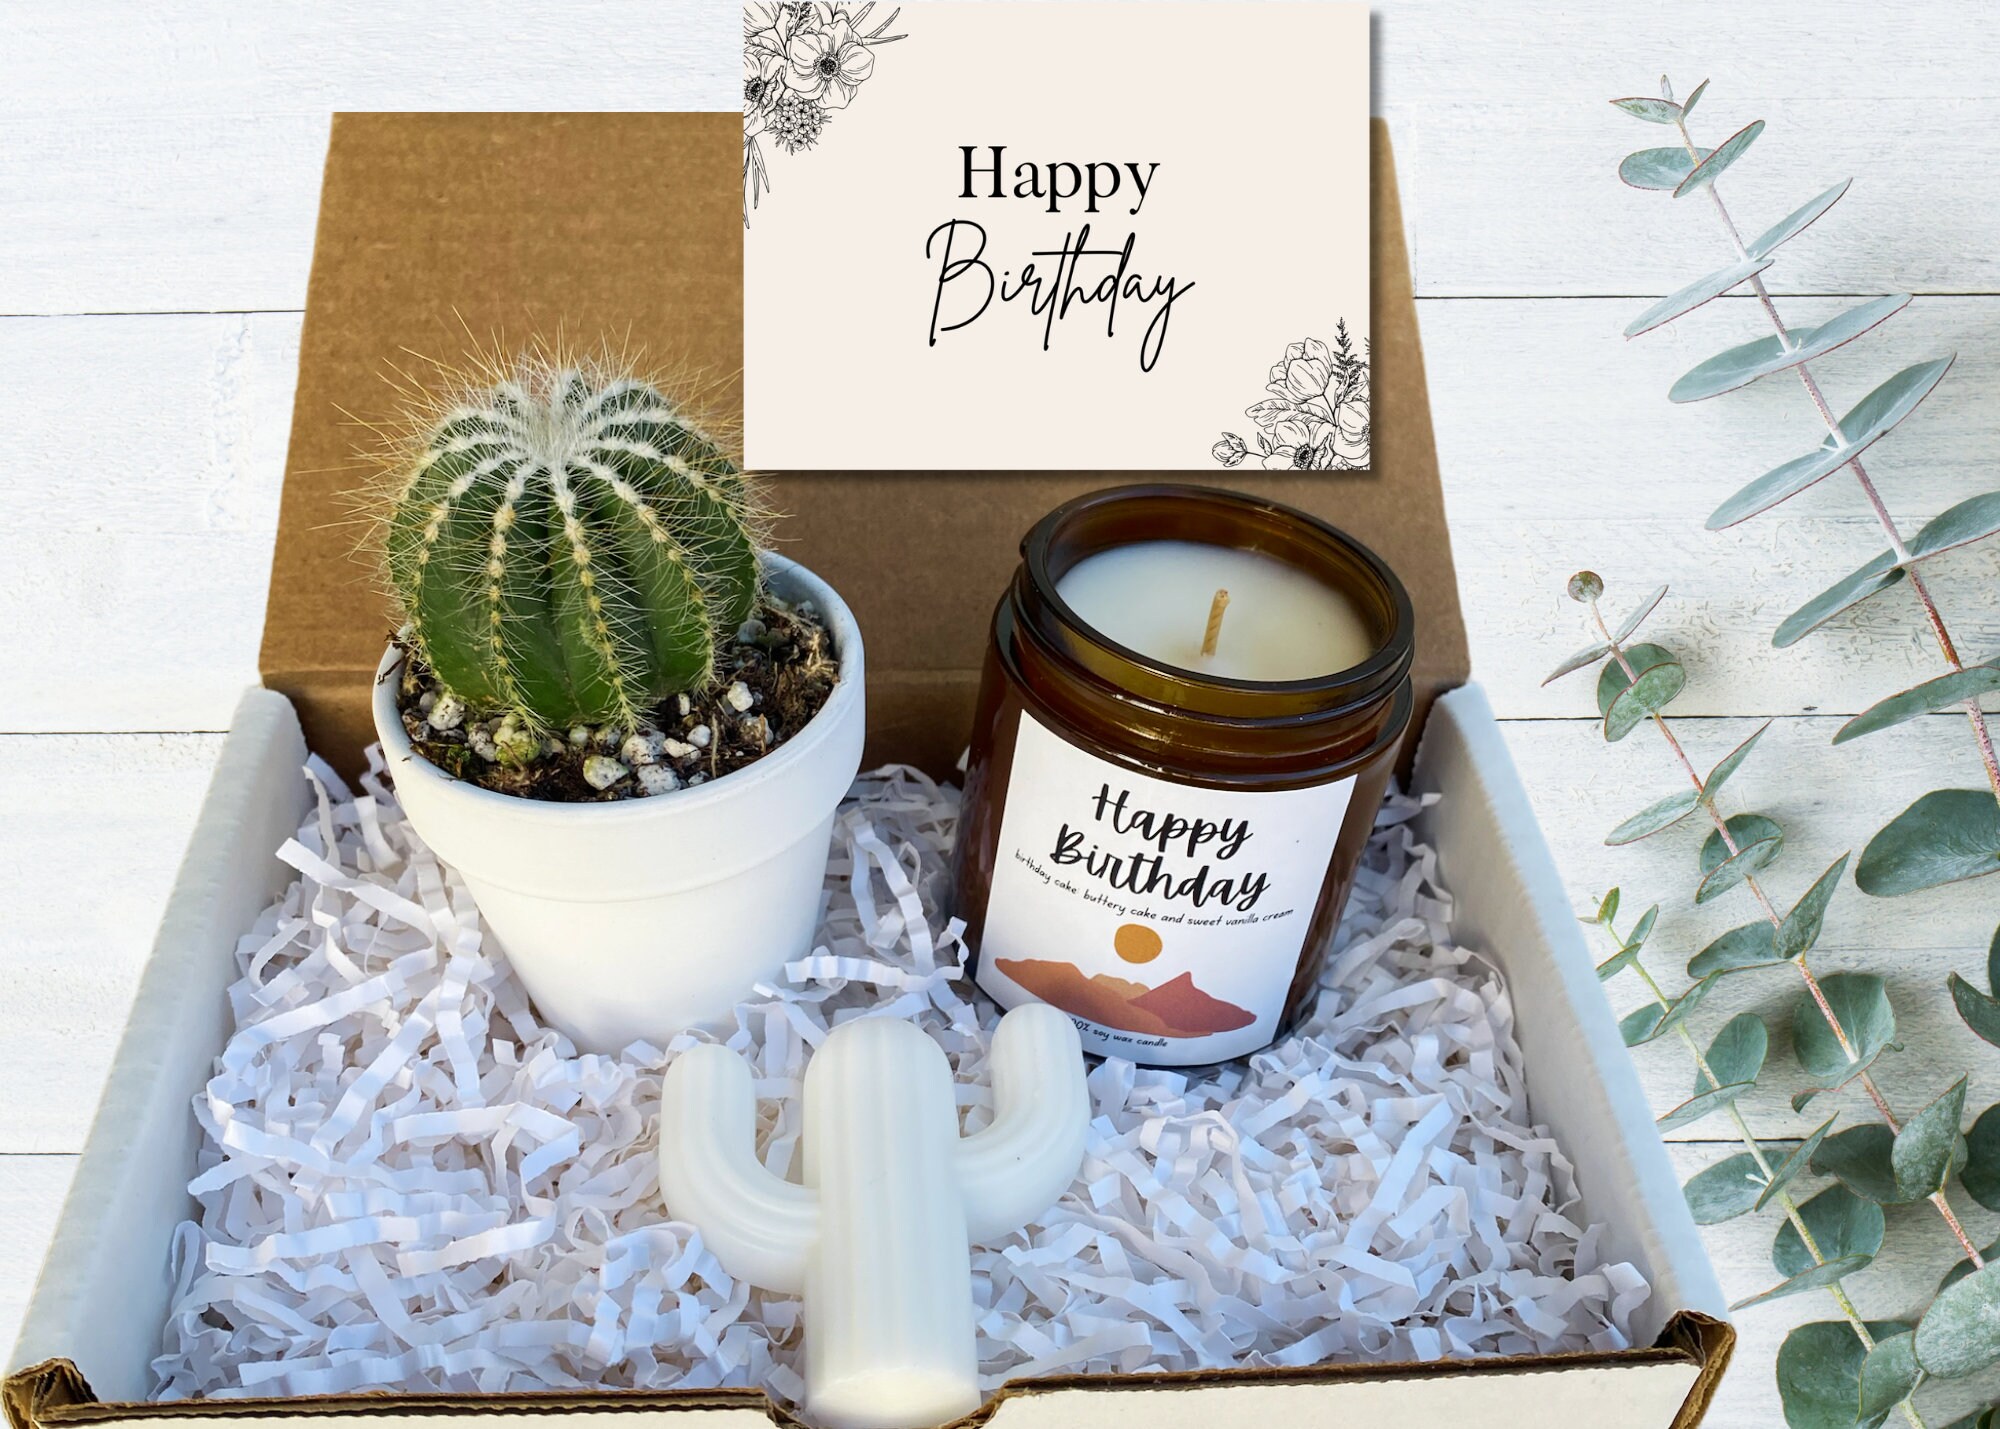 New Parents Gift Succulent Gift Box Parents to Be Ideas New Mom Gift Baby  Shower Gifts New Parents Gift Send a Gift Custom Gift 